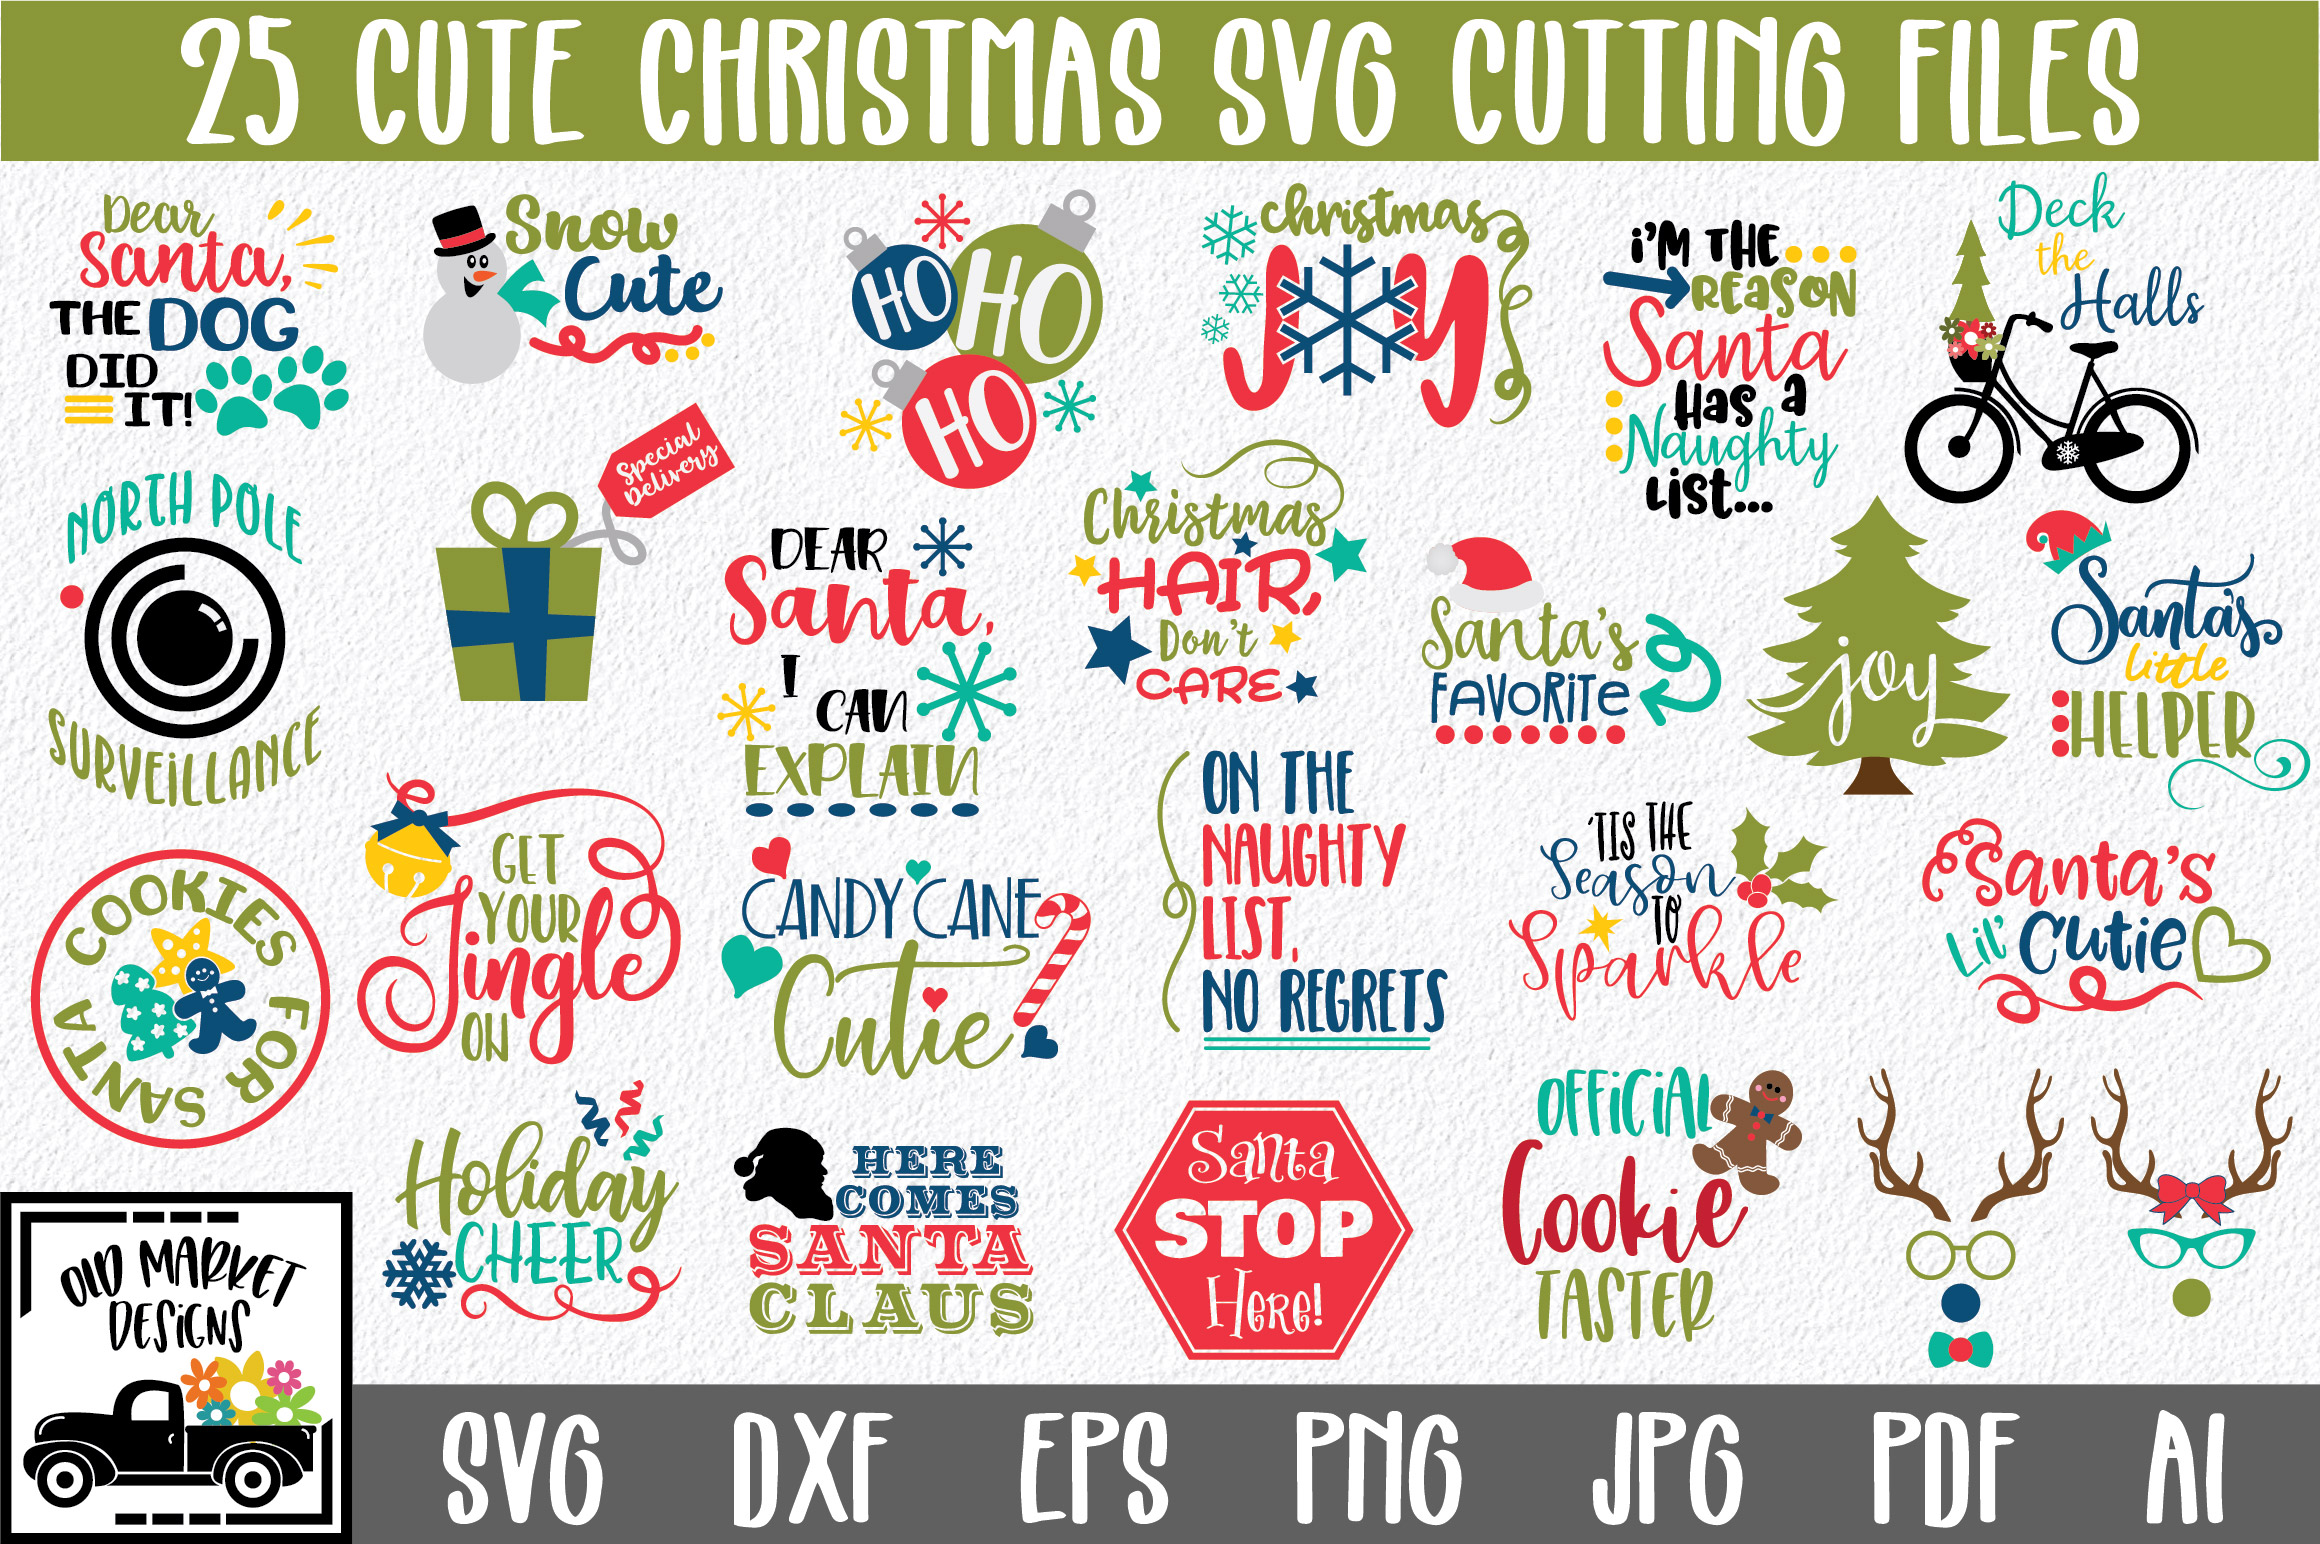 Cute Christmas SVG Bundle with 25 SVG Cut Files PNG DXF EPS